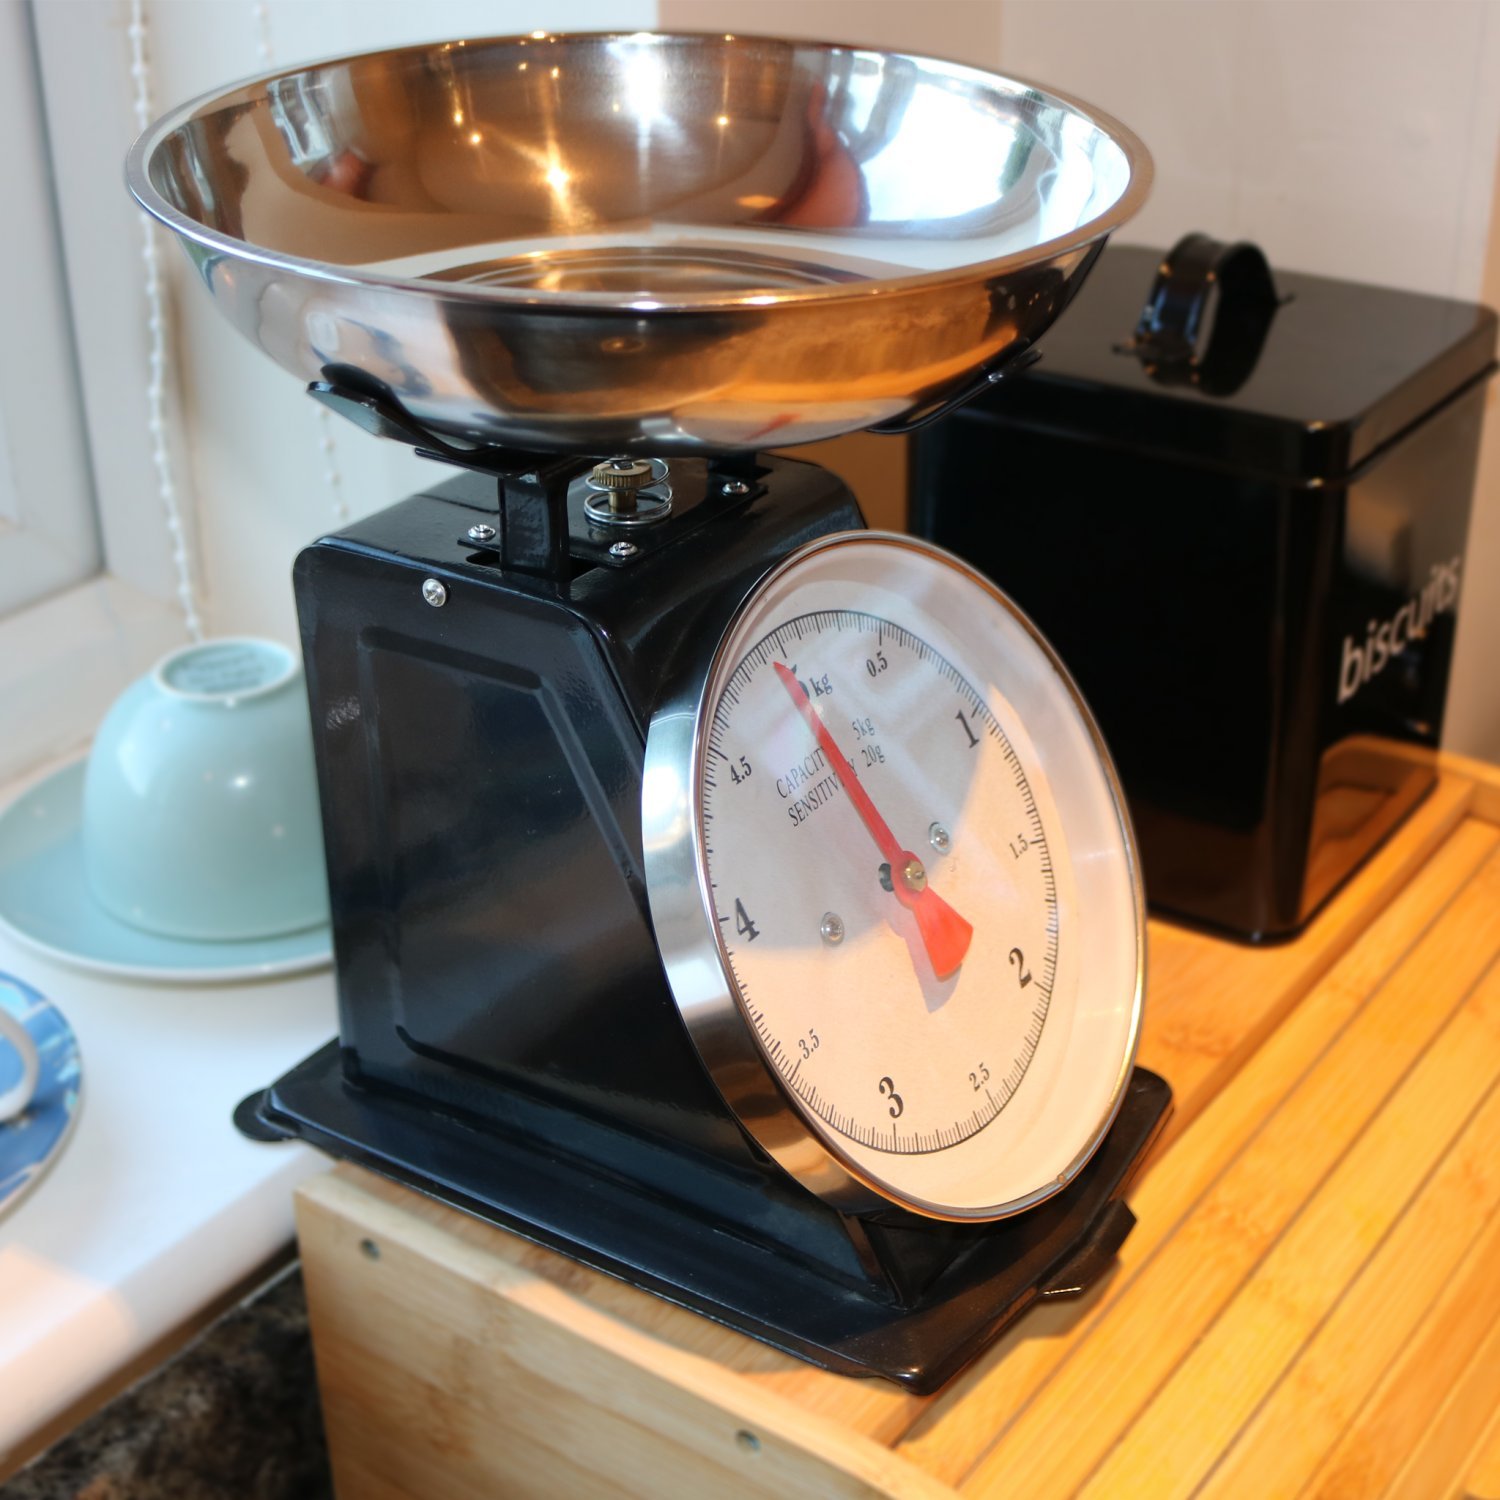 5kg Traditional Mechanical Kitchen Weighing Scales Retro Vintage £12